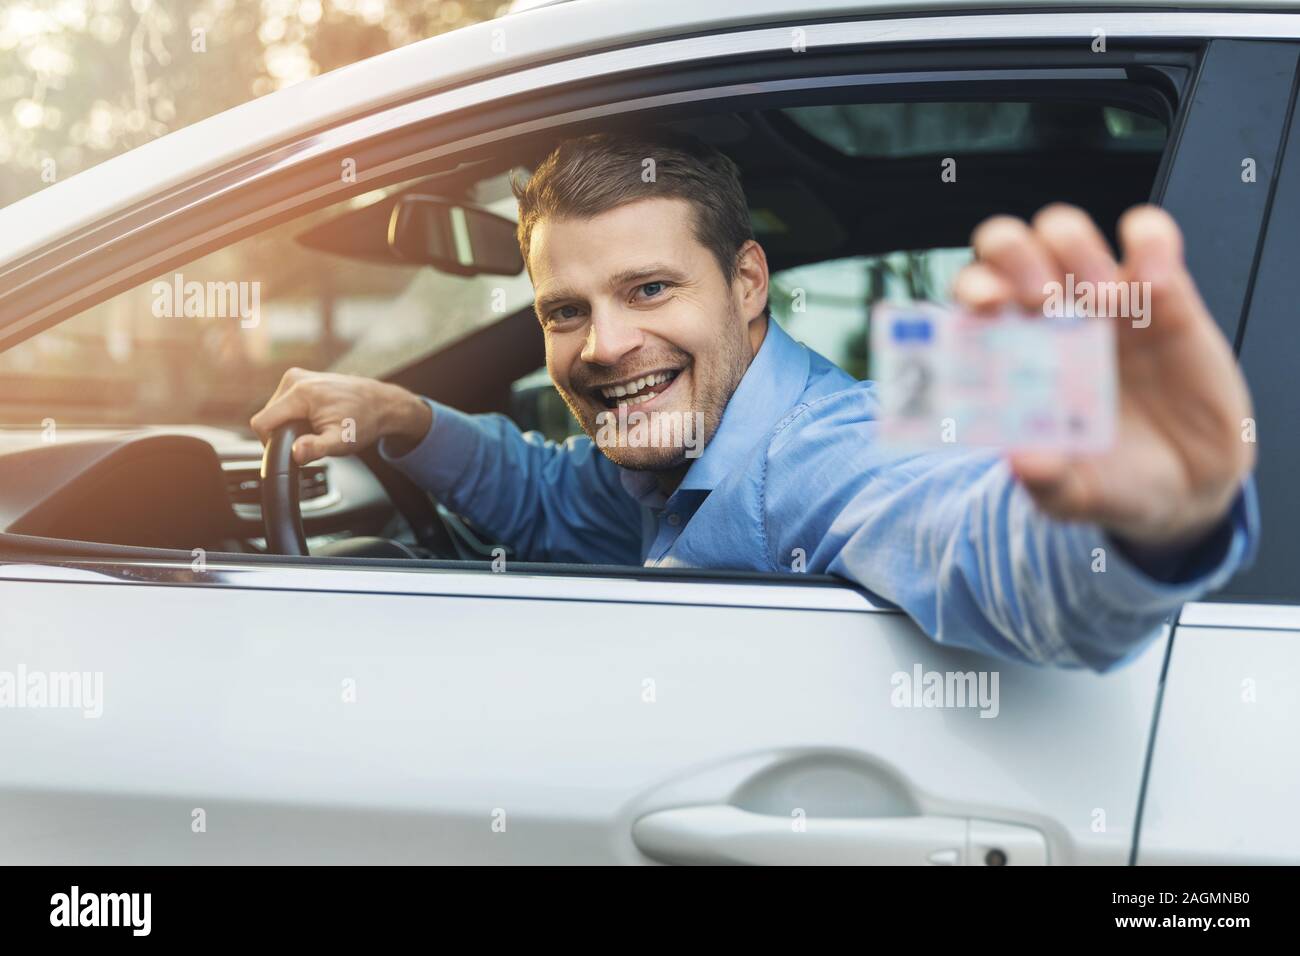 man sitting in the car and showing his driver license out of car window Stock Photo